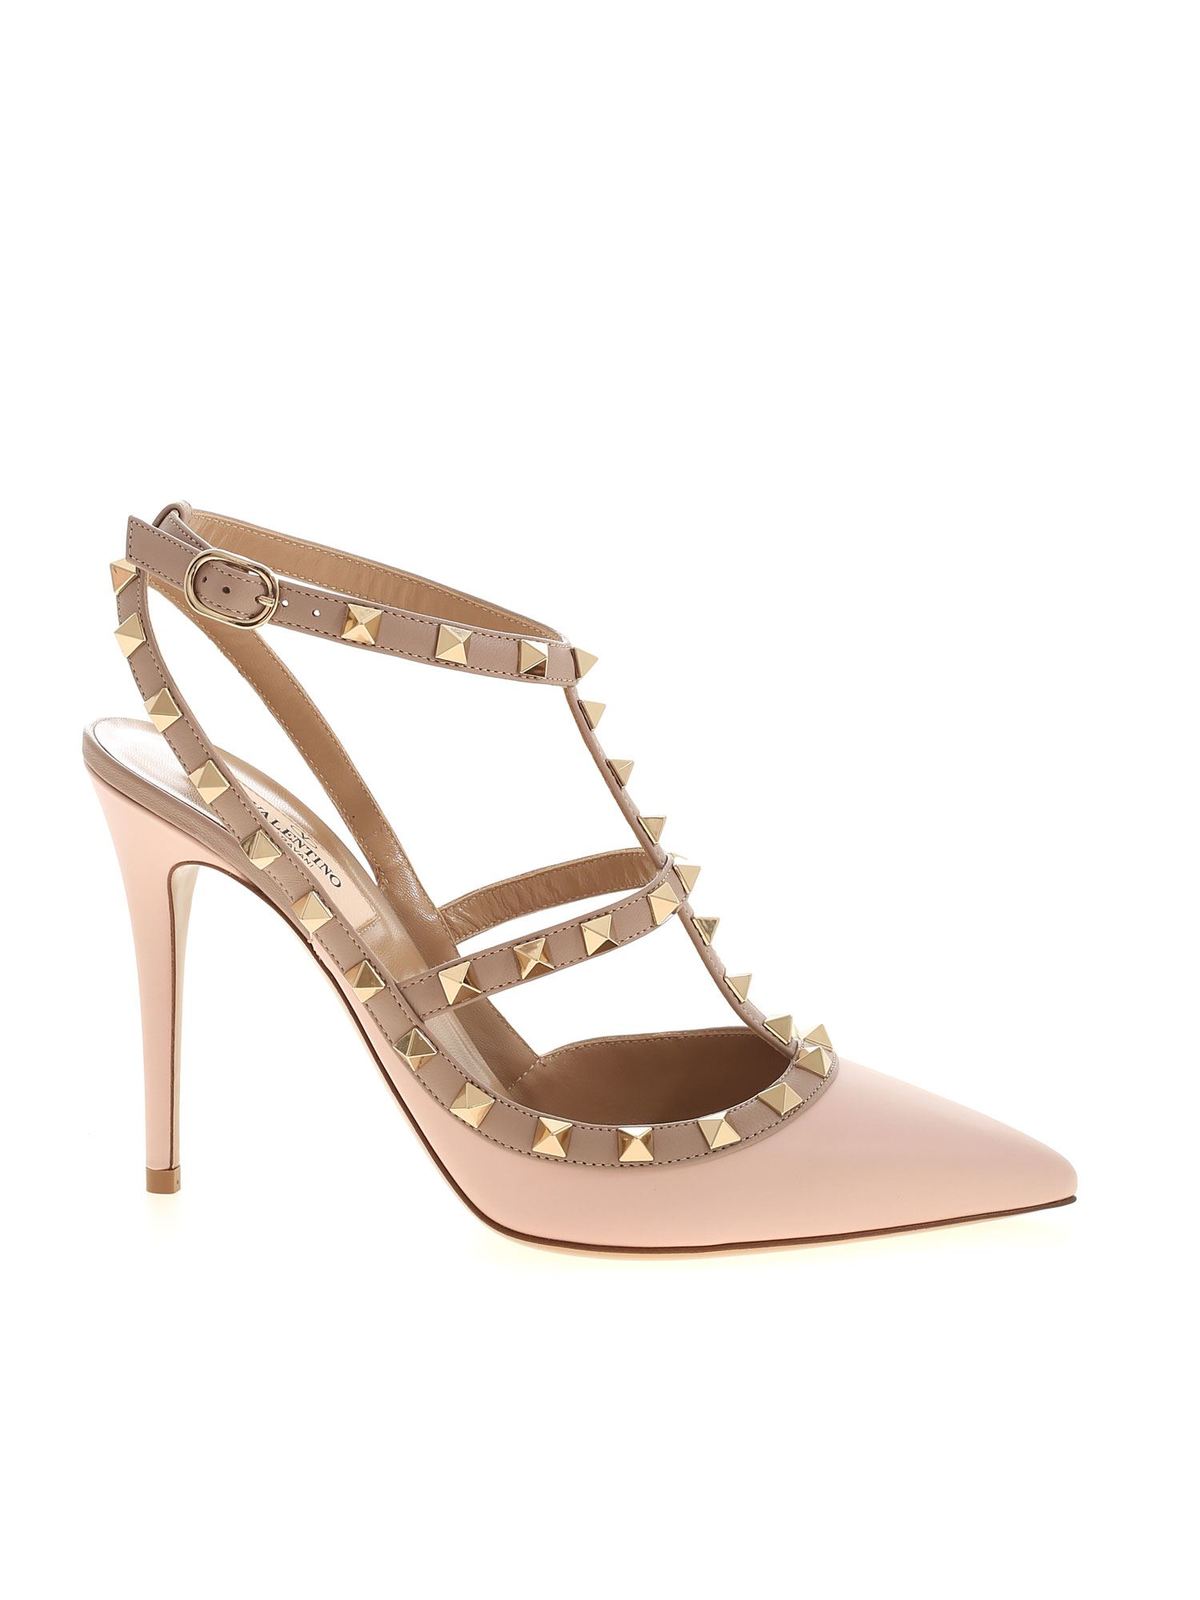 Valentino Garavani Ankle Straps In Pink With Straps And Studs